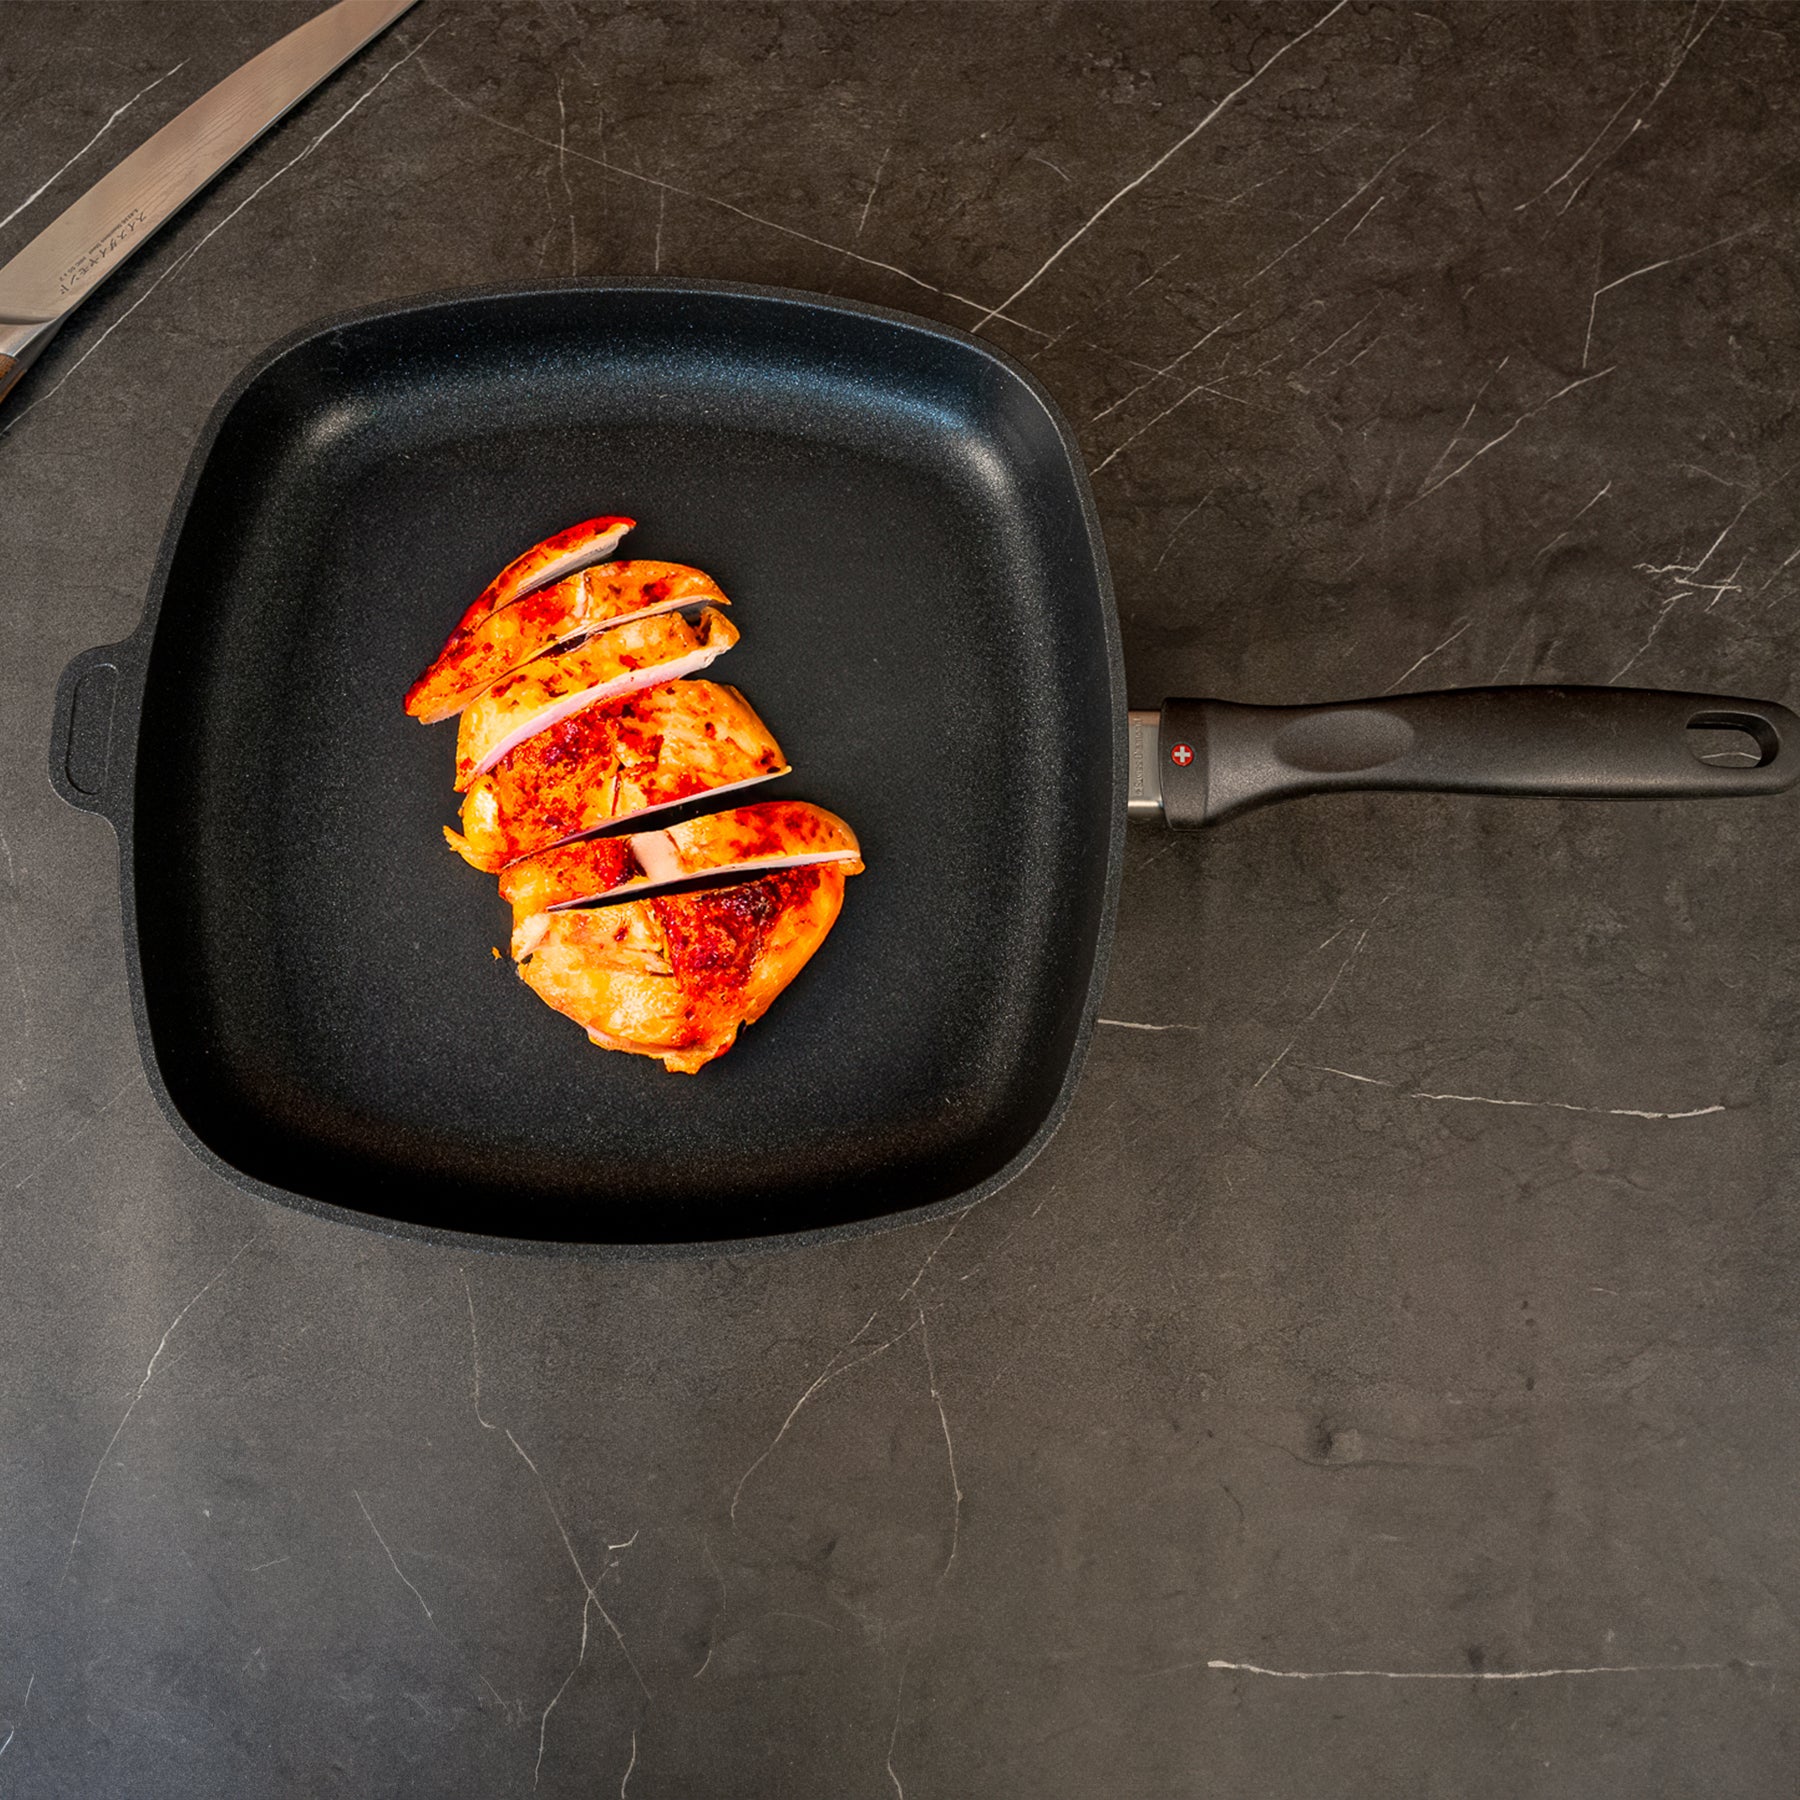 XD Nonstick 11" x 11" Square Fry Pan - Induction in use with cooked chicken on surface